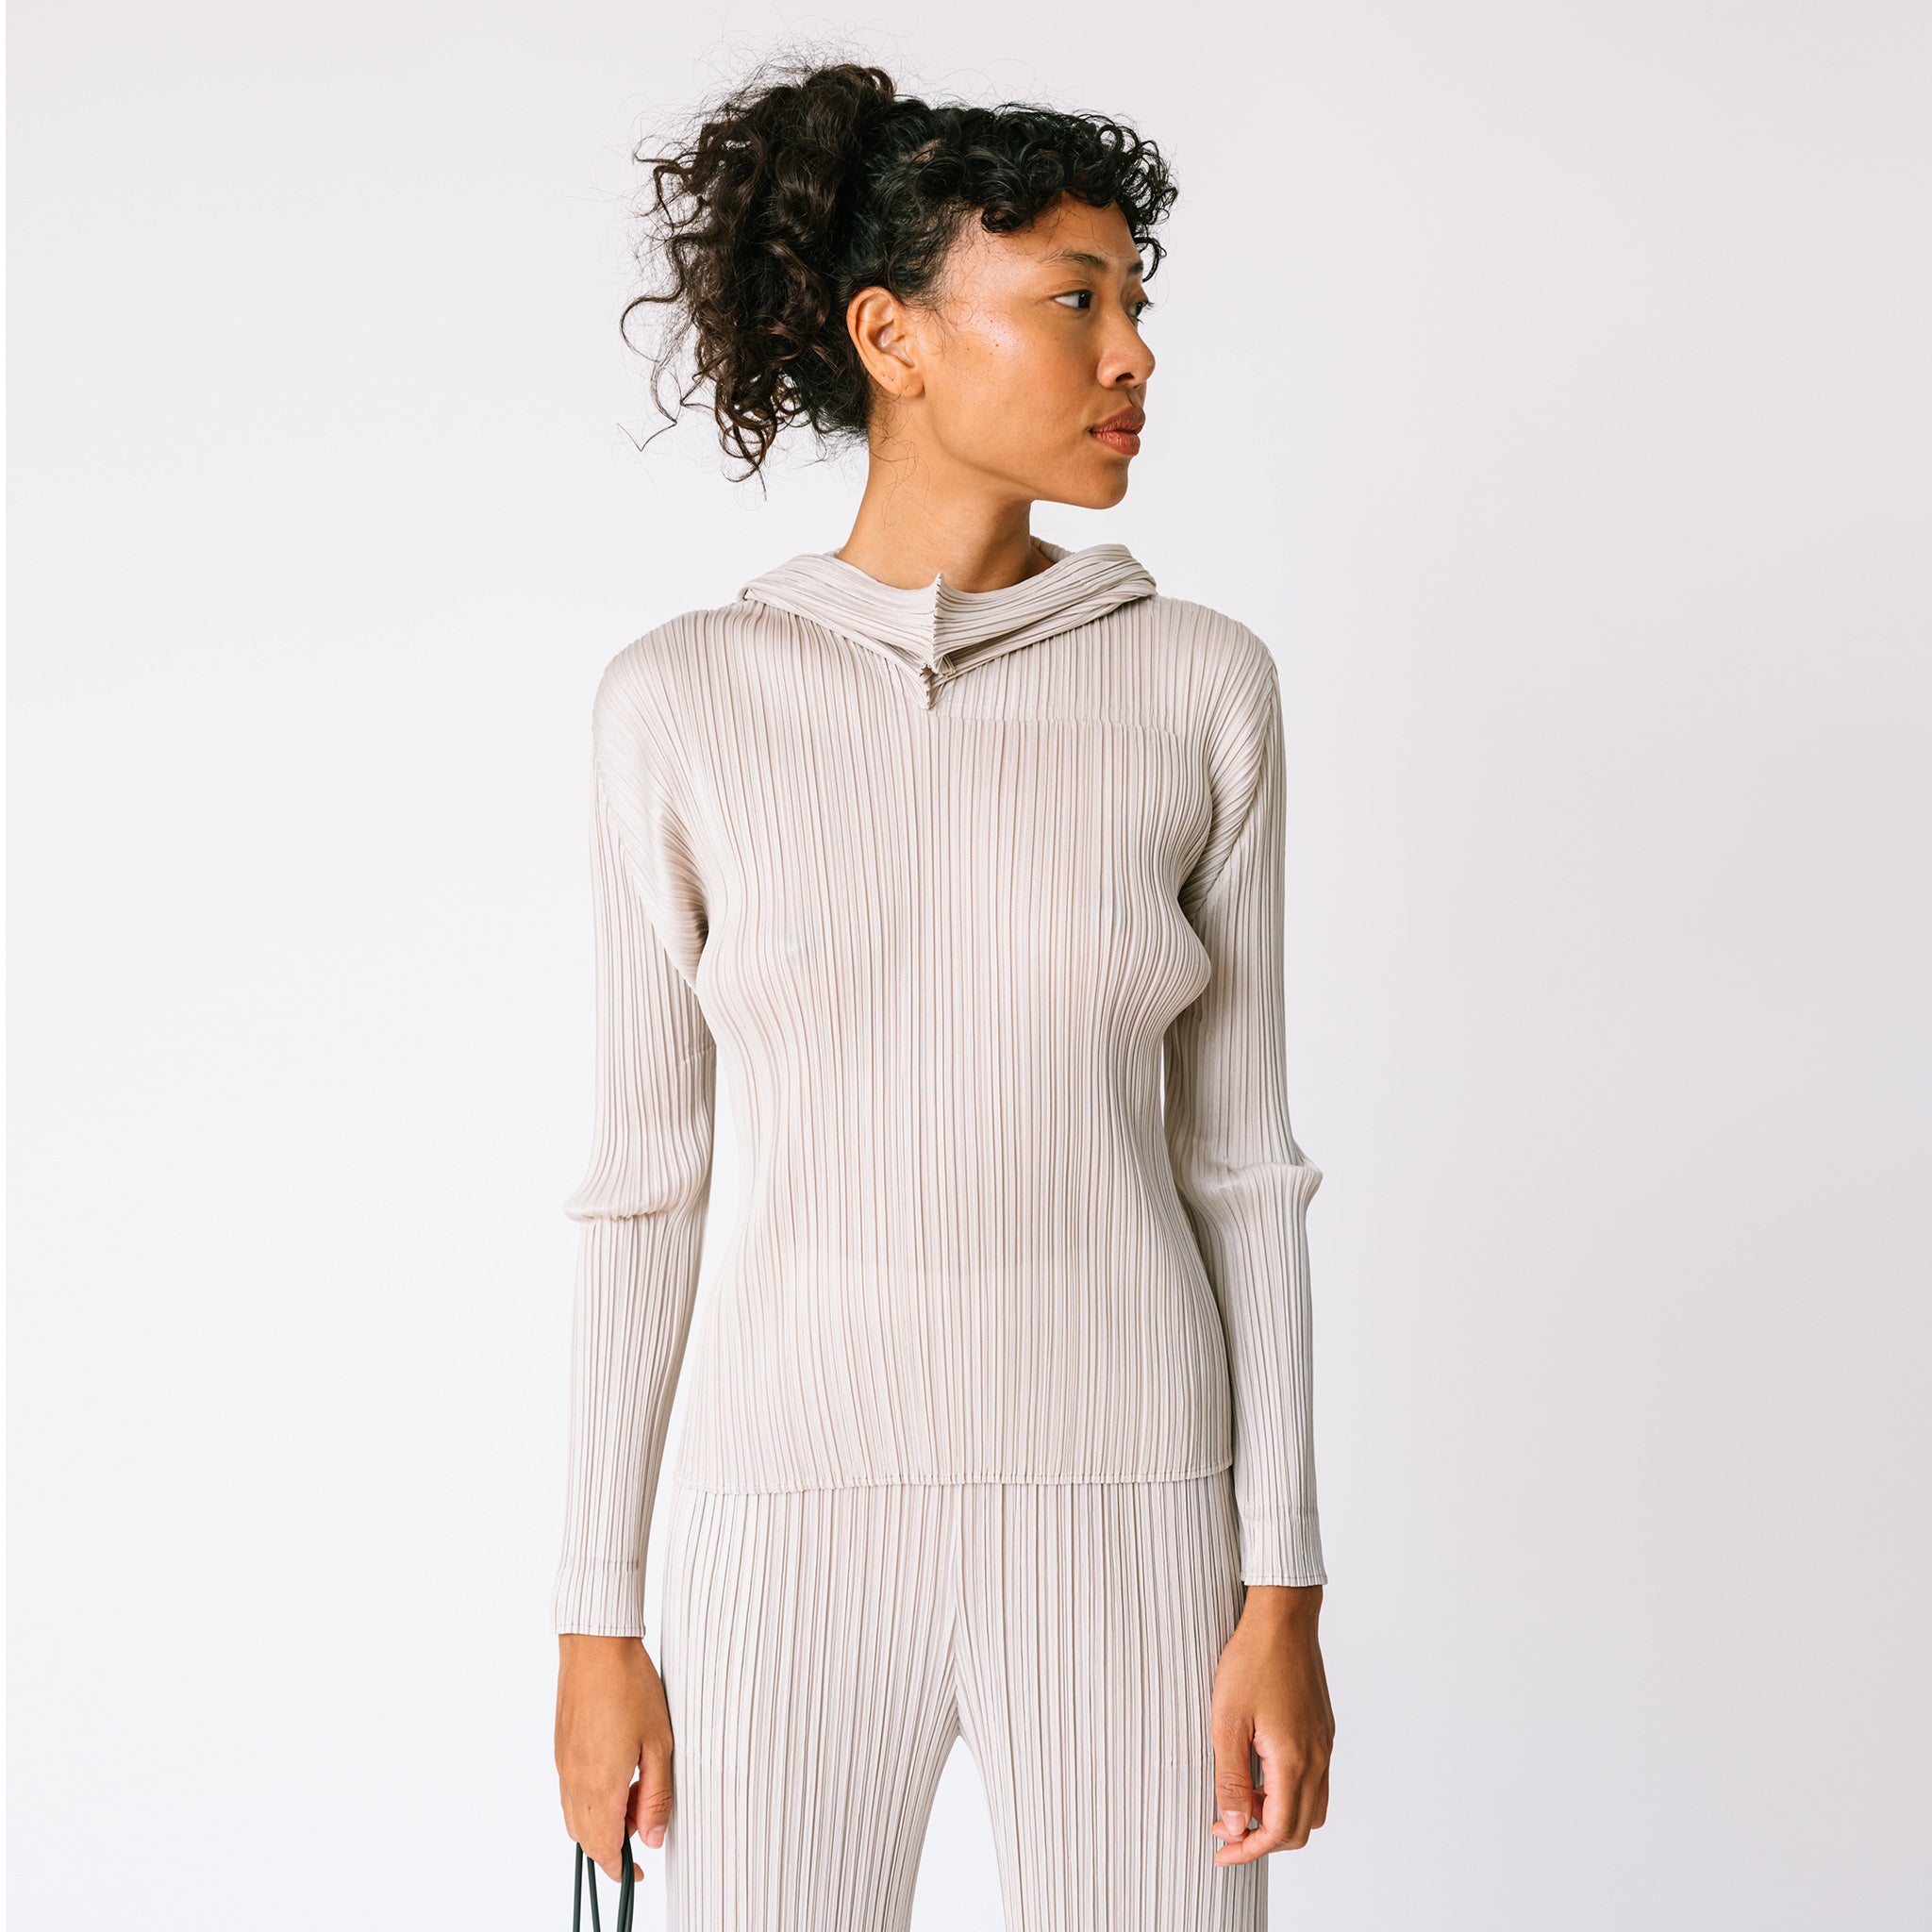 A model looks to the side while wearing the light grey Pleats Please pleated hoodie in greige, with matching pleated pants.